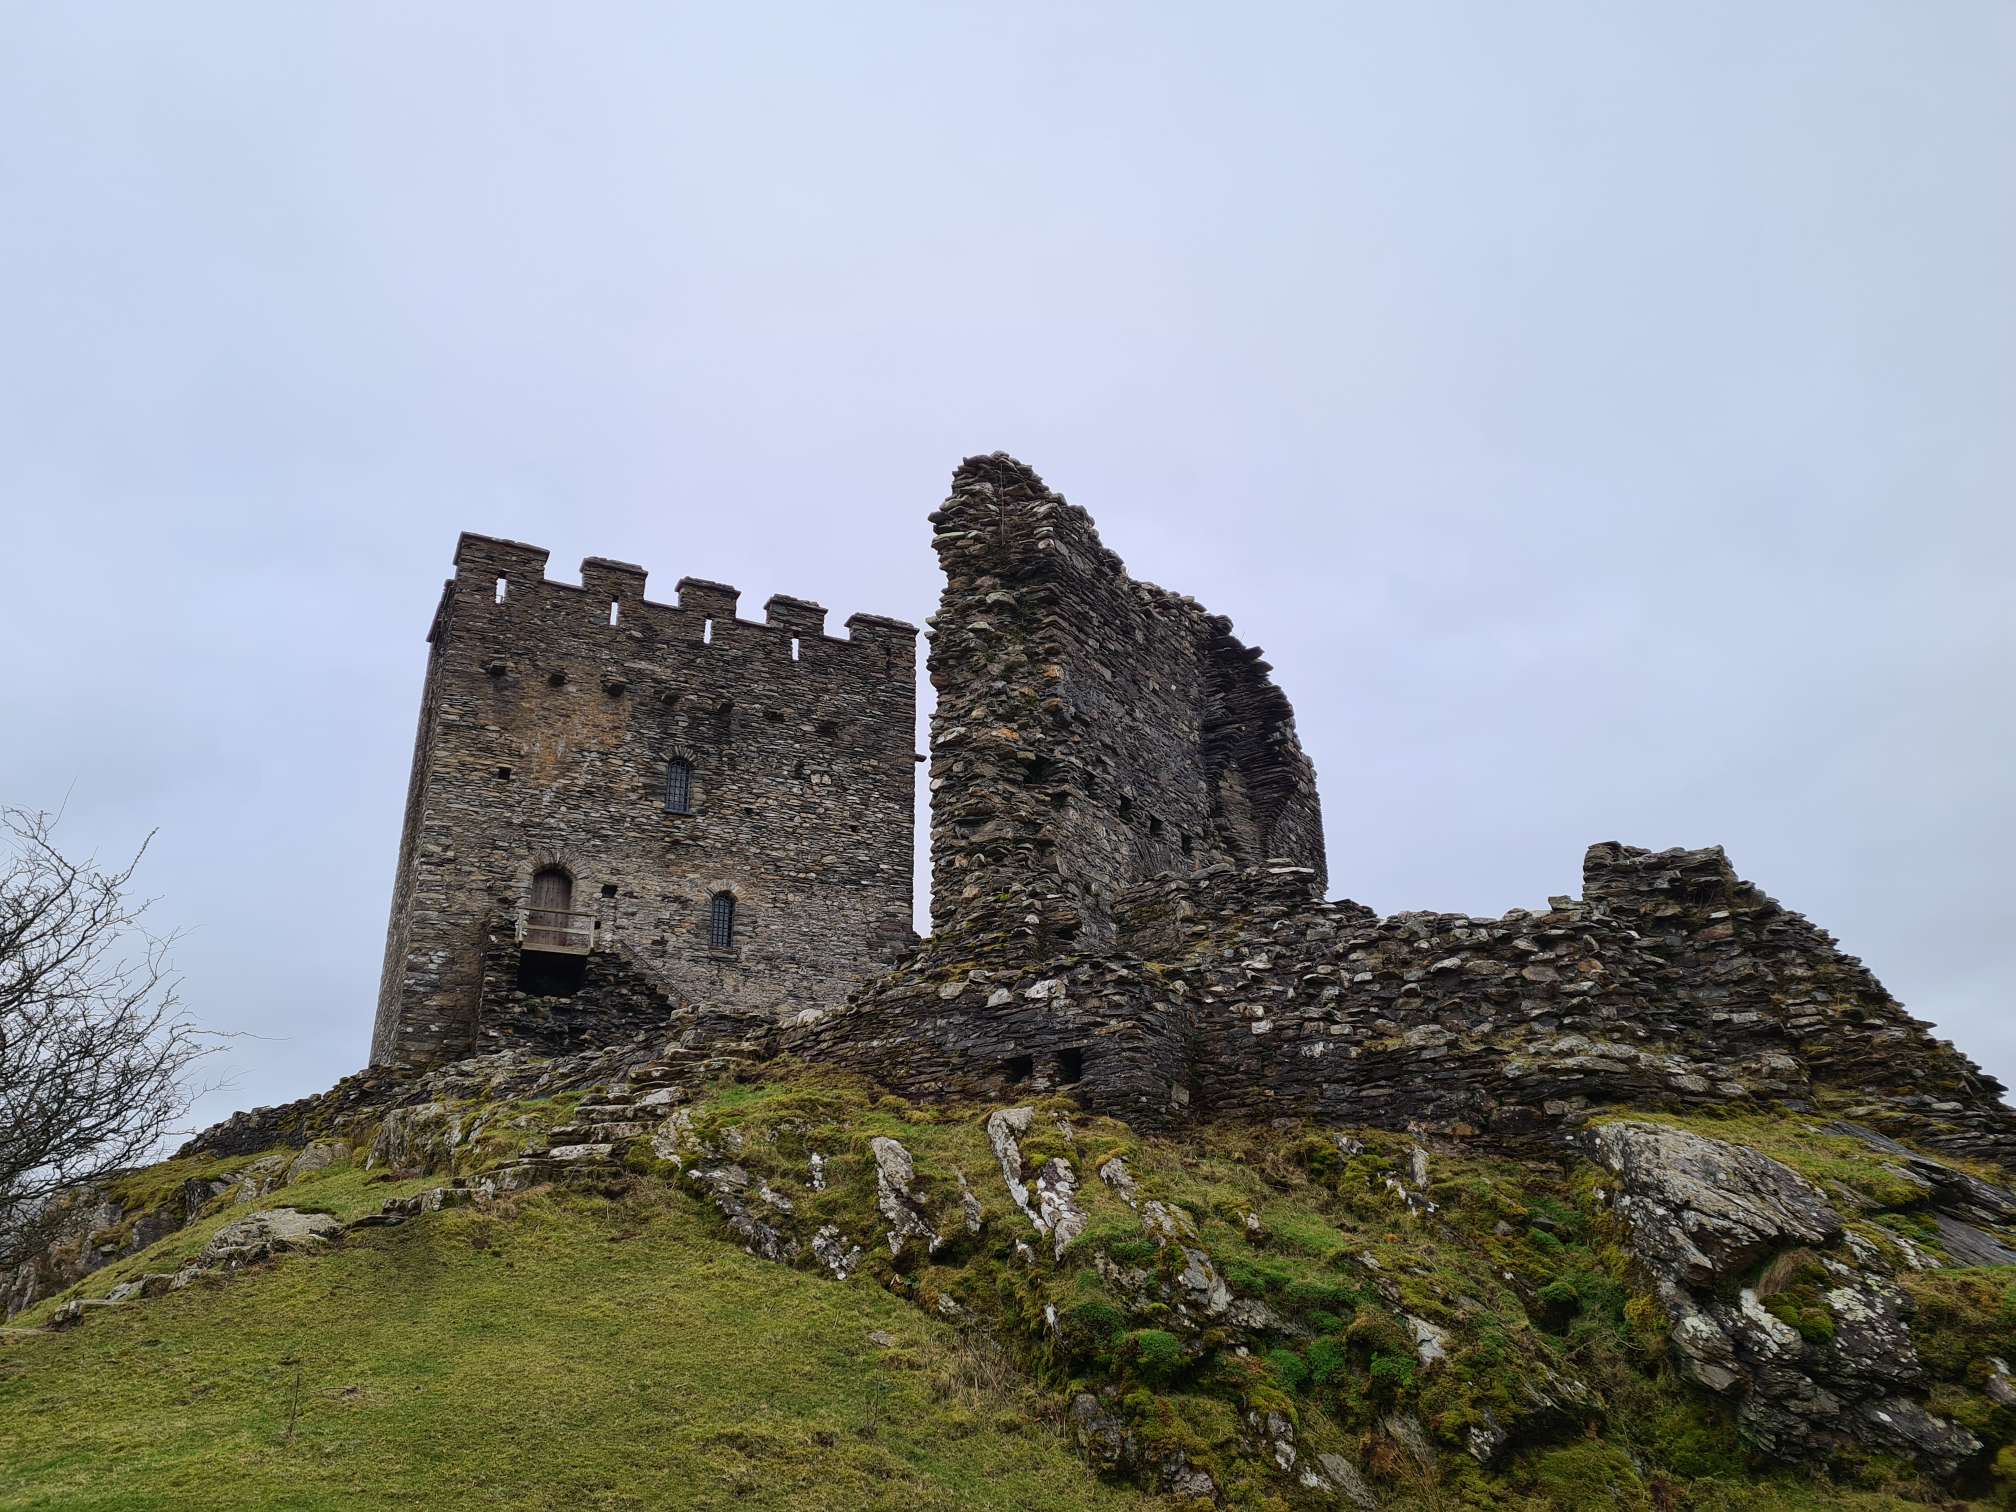 Looking up the hill at Dolwyddelan Castle